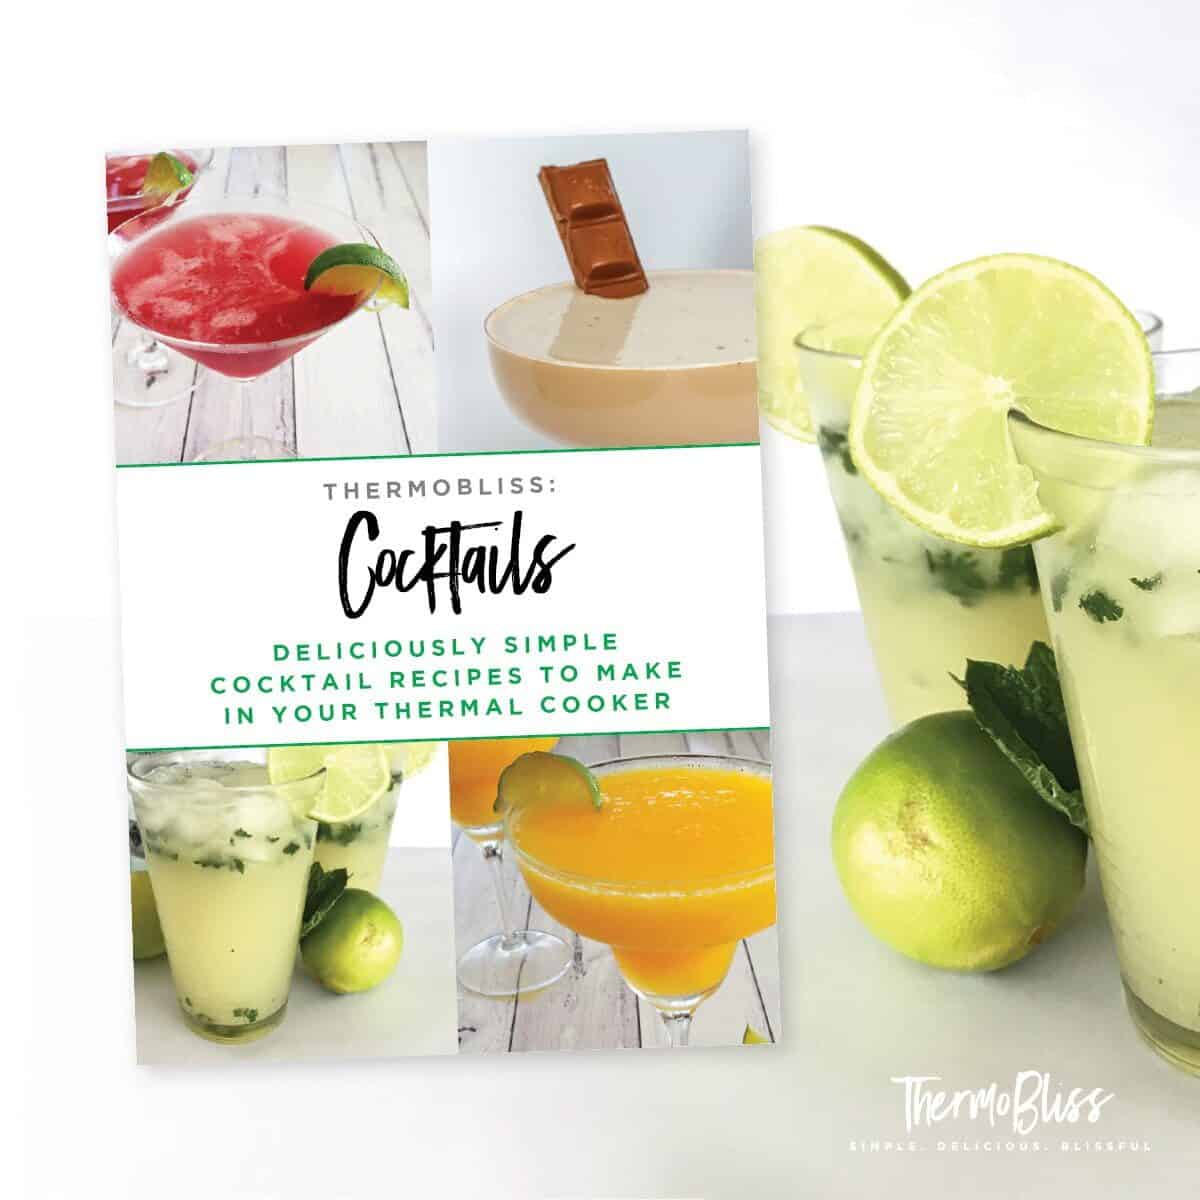 Image of the front cover of ThermoBliss Cocktails book.